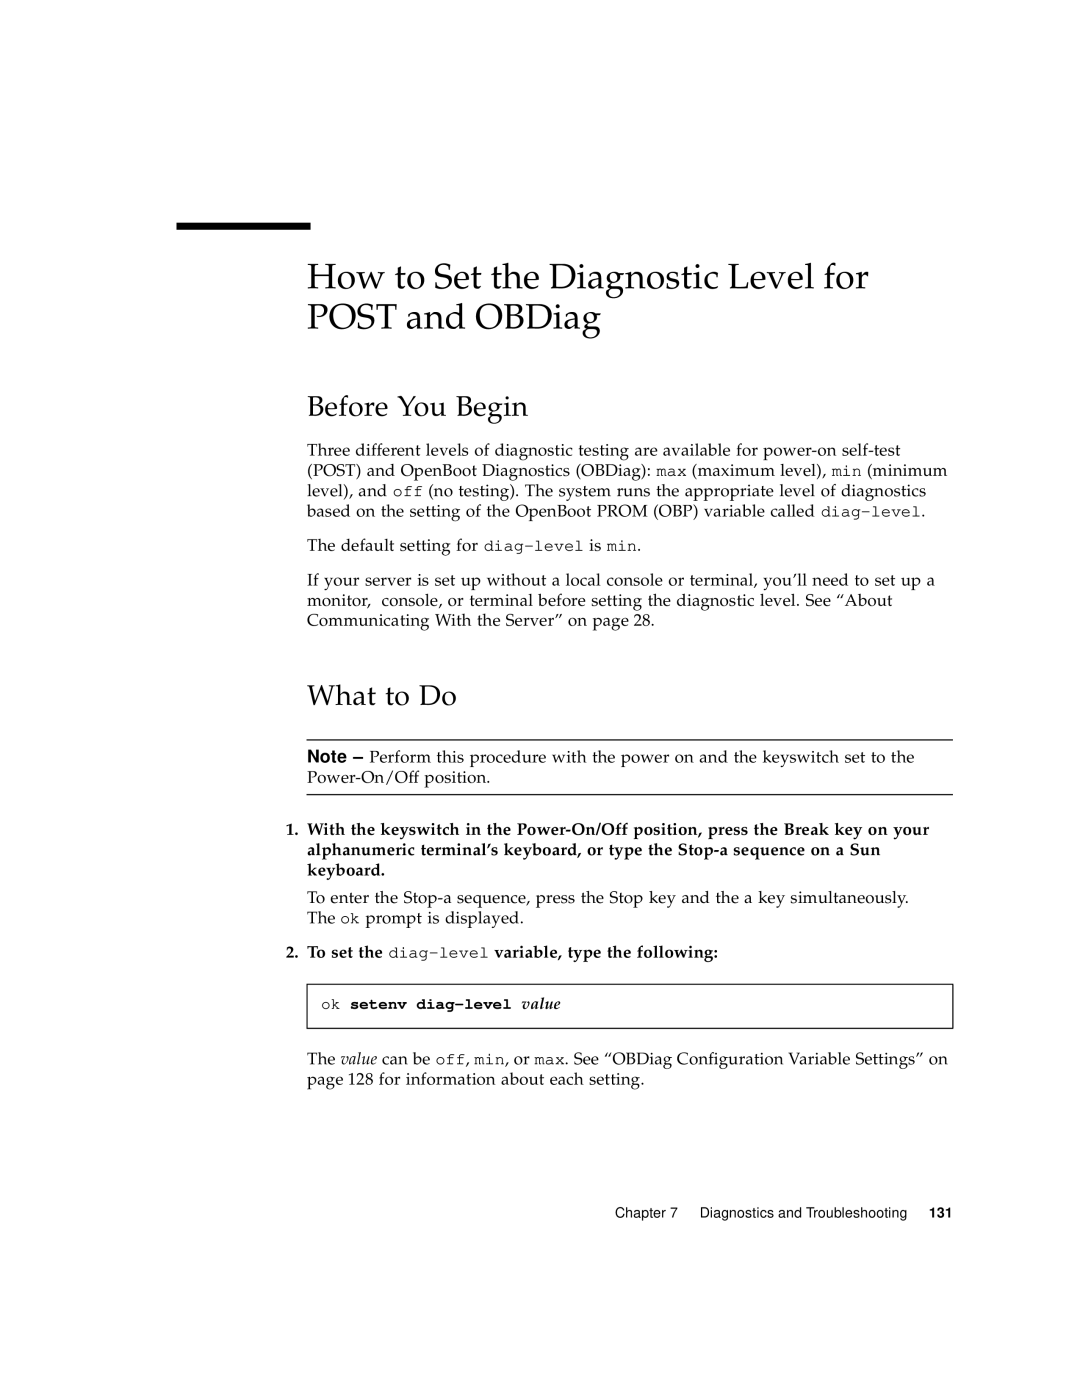 Sun Microsystems 220R manual How to Set the Diagnostic Level for POST and OBDiag, Before You Begin, What to Do 